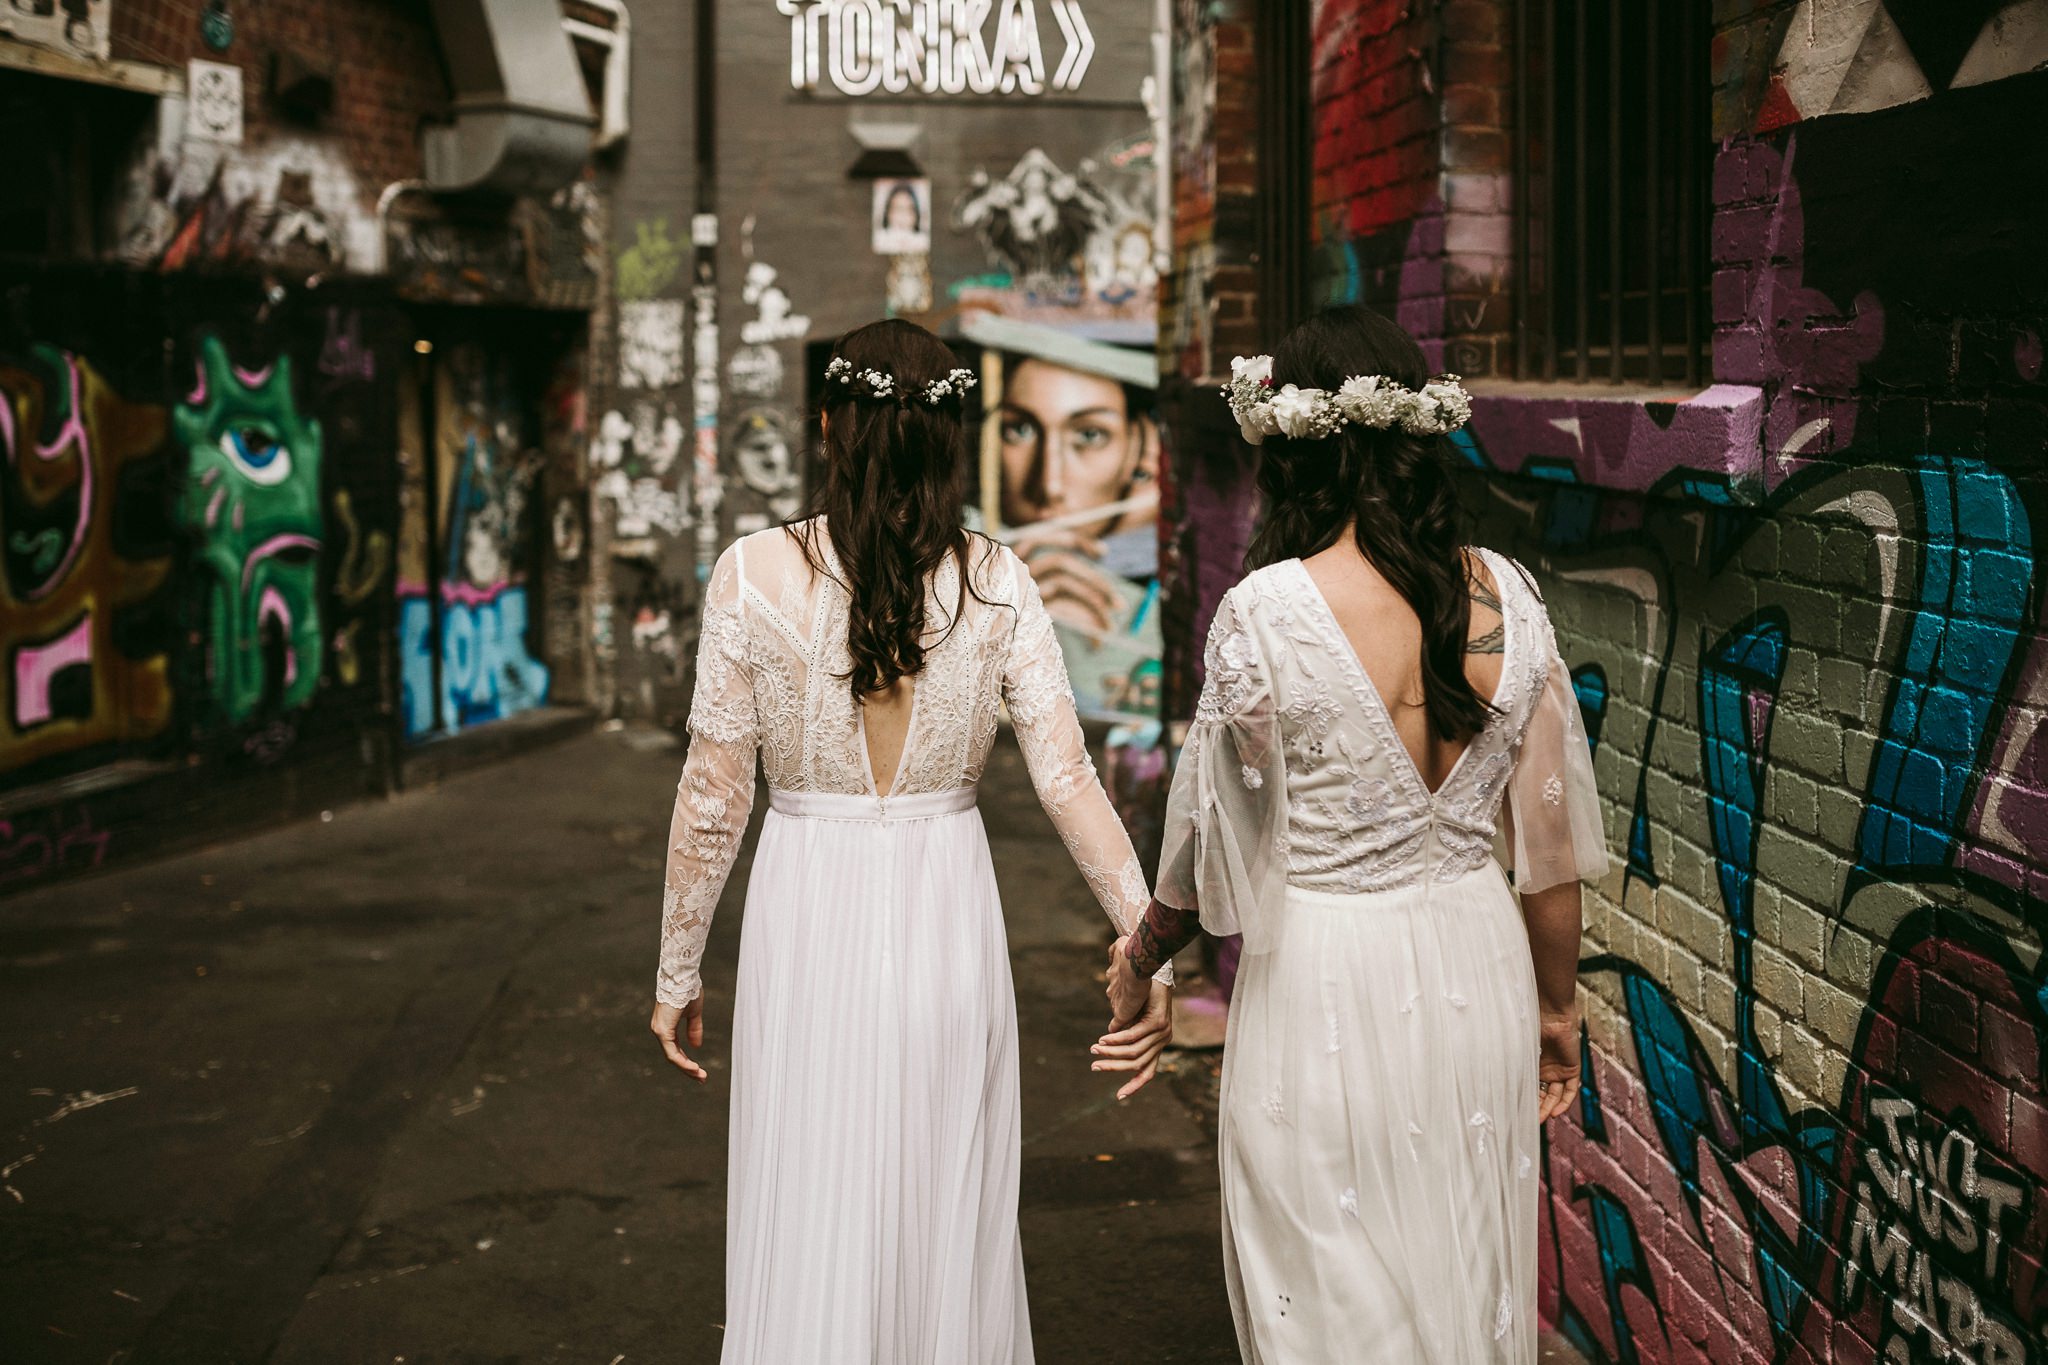 Melbourne Alternative Elopement Photography / Fun candid tiny wedding in Melbourne / Fitzroy Gardens Relaxed Elopement Photography / Melbourne Wedding Photography / Gold and Grit Photography